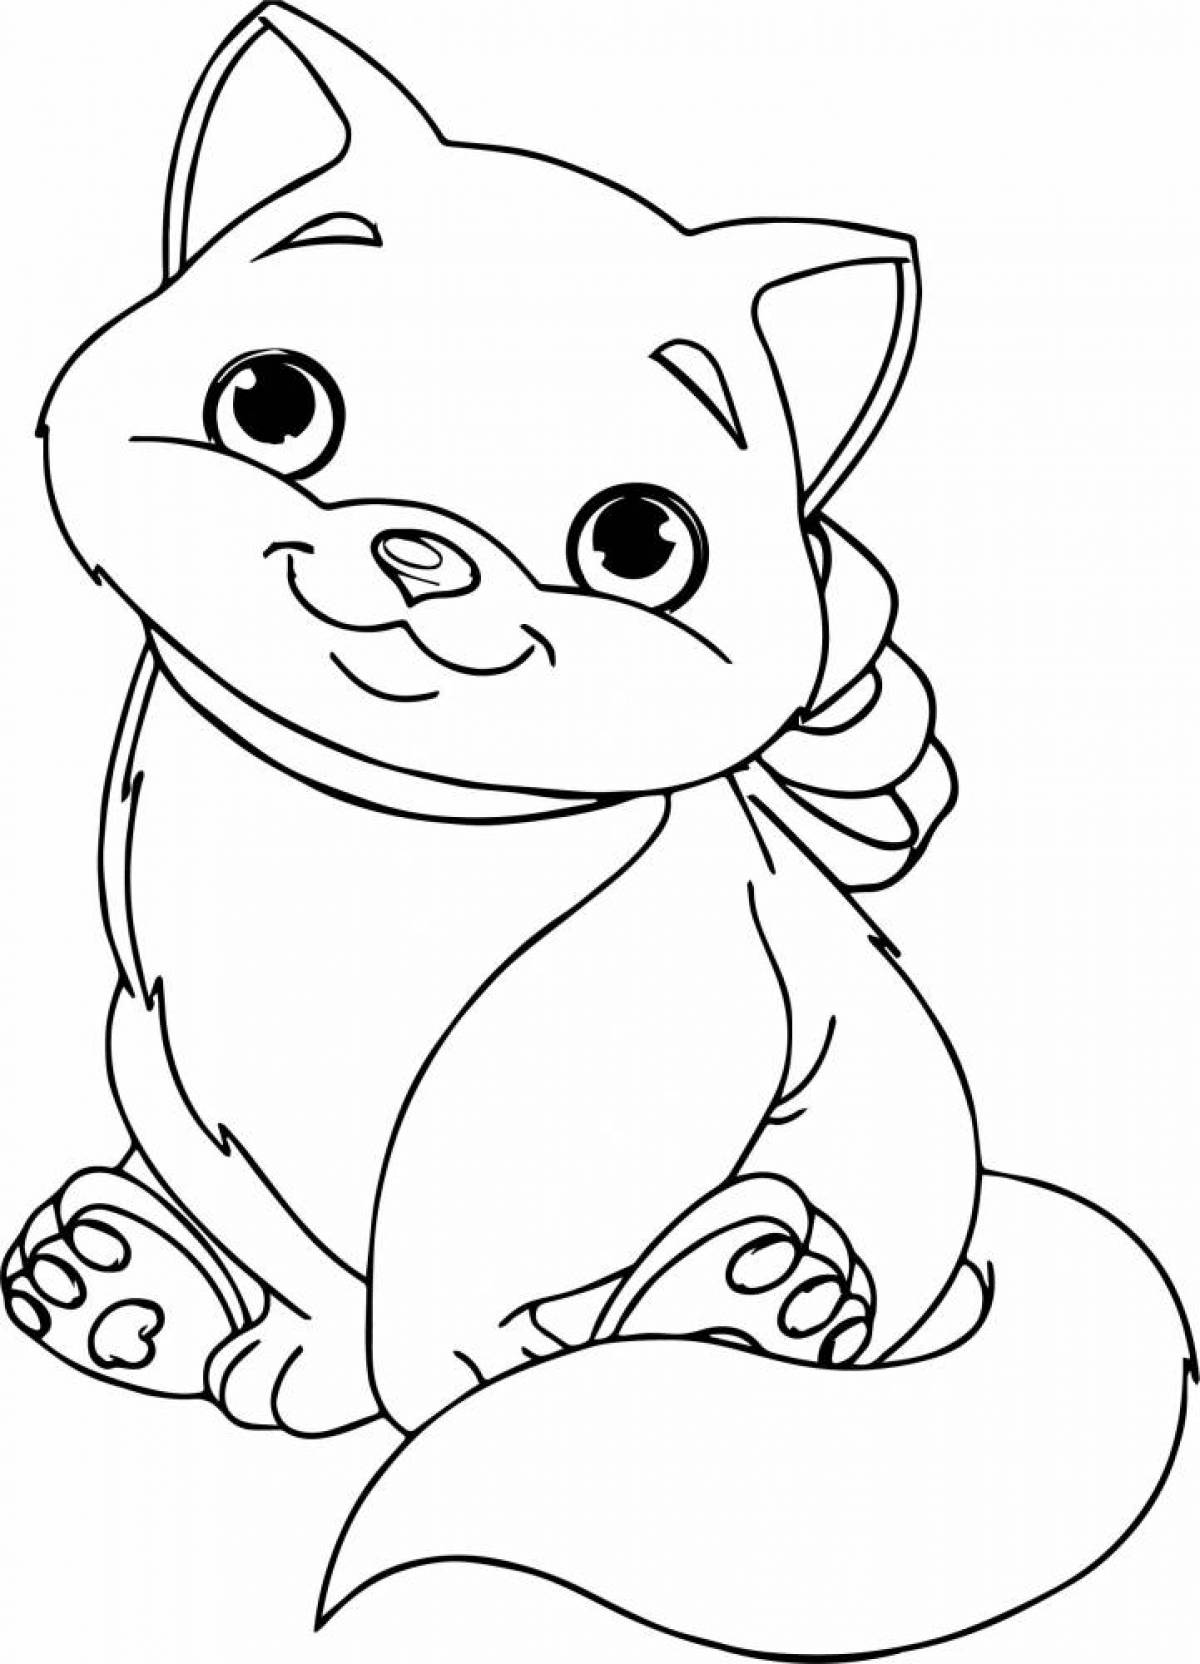 Coloring page naughty cute cat